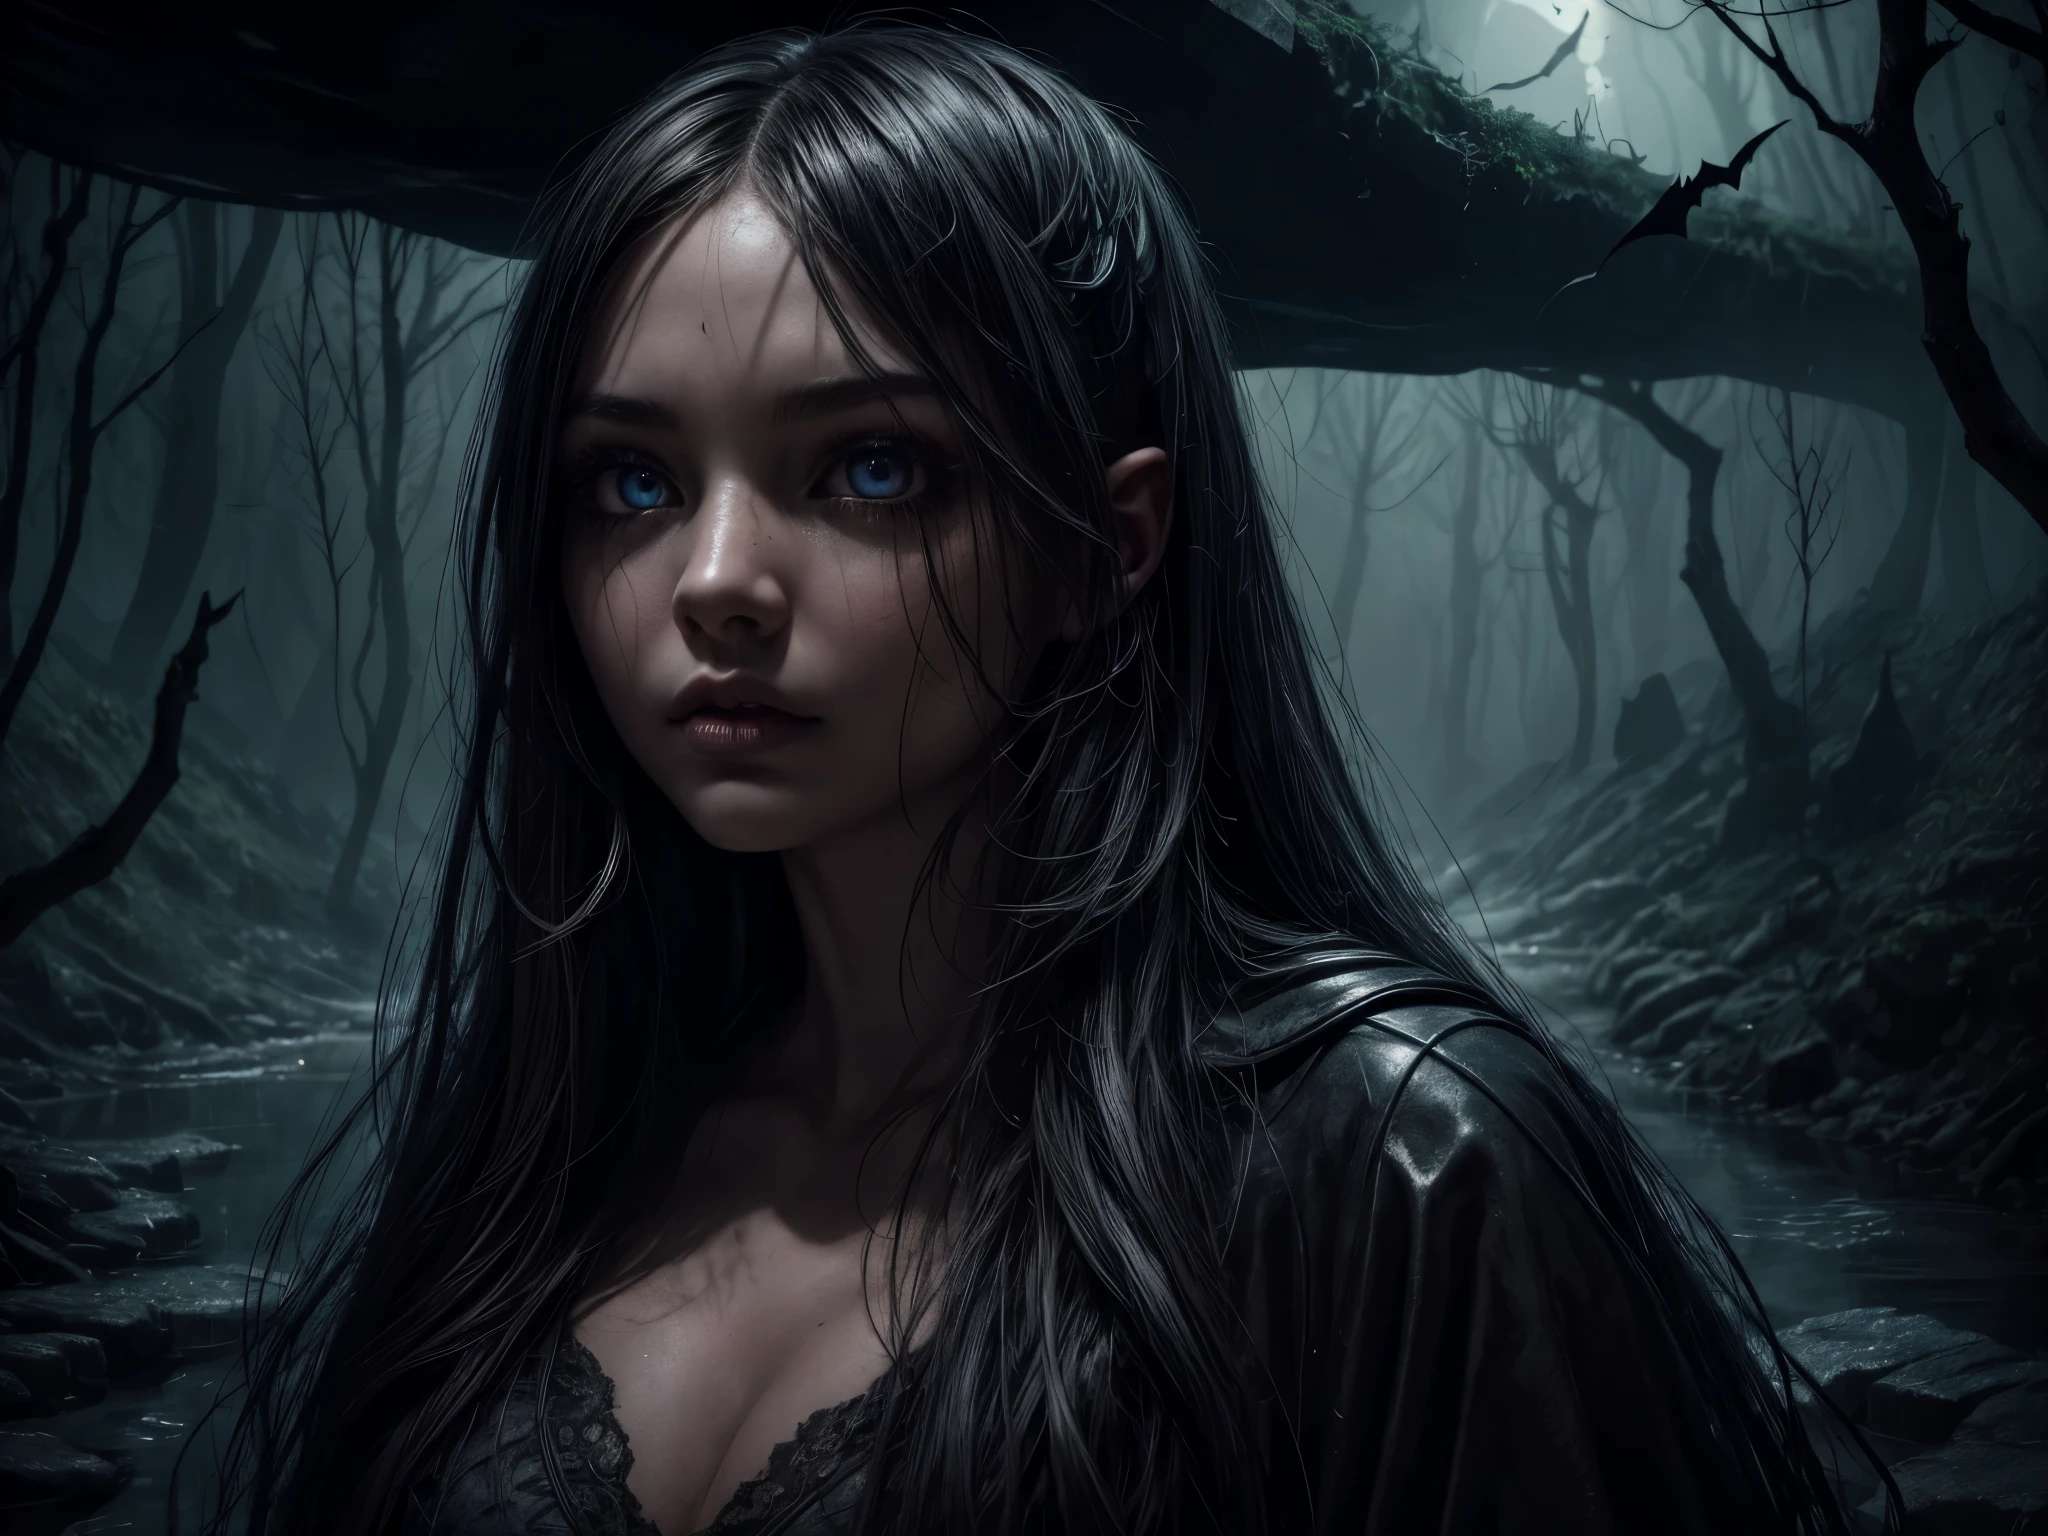 a girl lost in an underground maze,details of beautiful eyes,beautiful detailed lips,longeyelashes,skull,bats,a river flowing underground,illustration,highres,ultra-detailed,photorealistic,dark atmosphere,gloomy lighting,stone textures,mysterious shadows,spooky scenery,horror,subterranean,underground river,lit torches,damp walls,winding paths